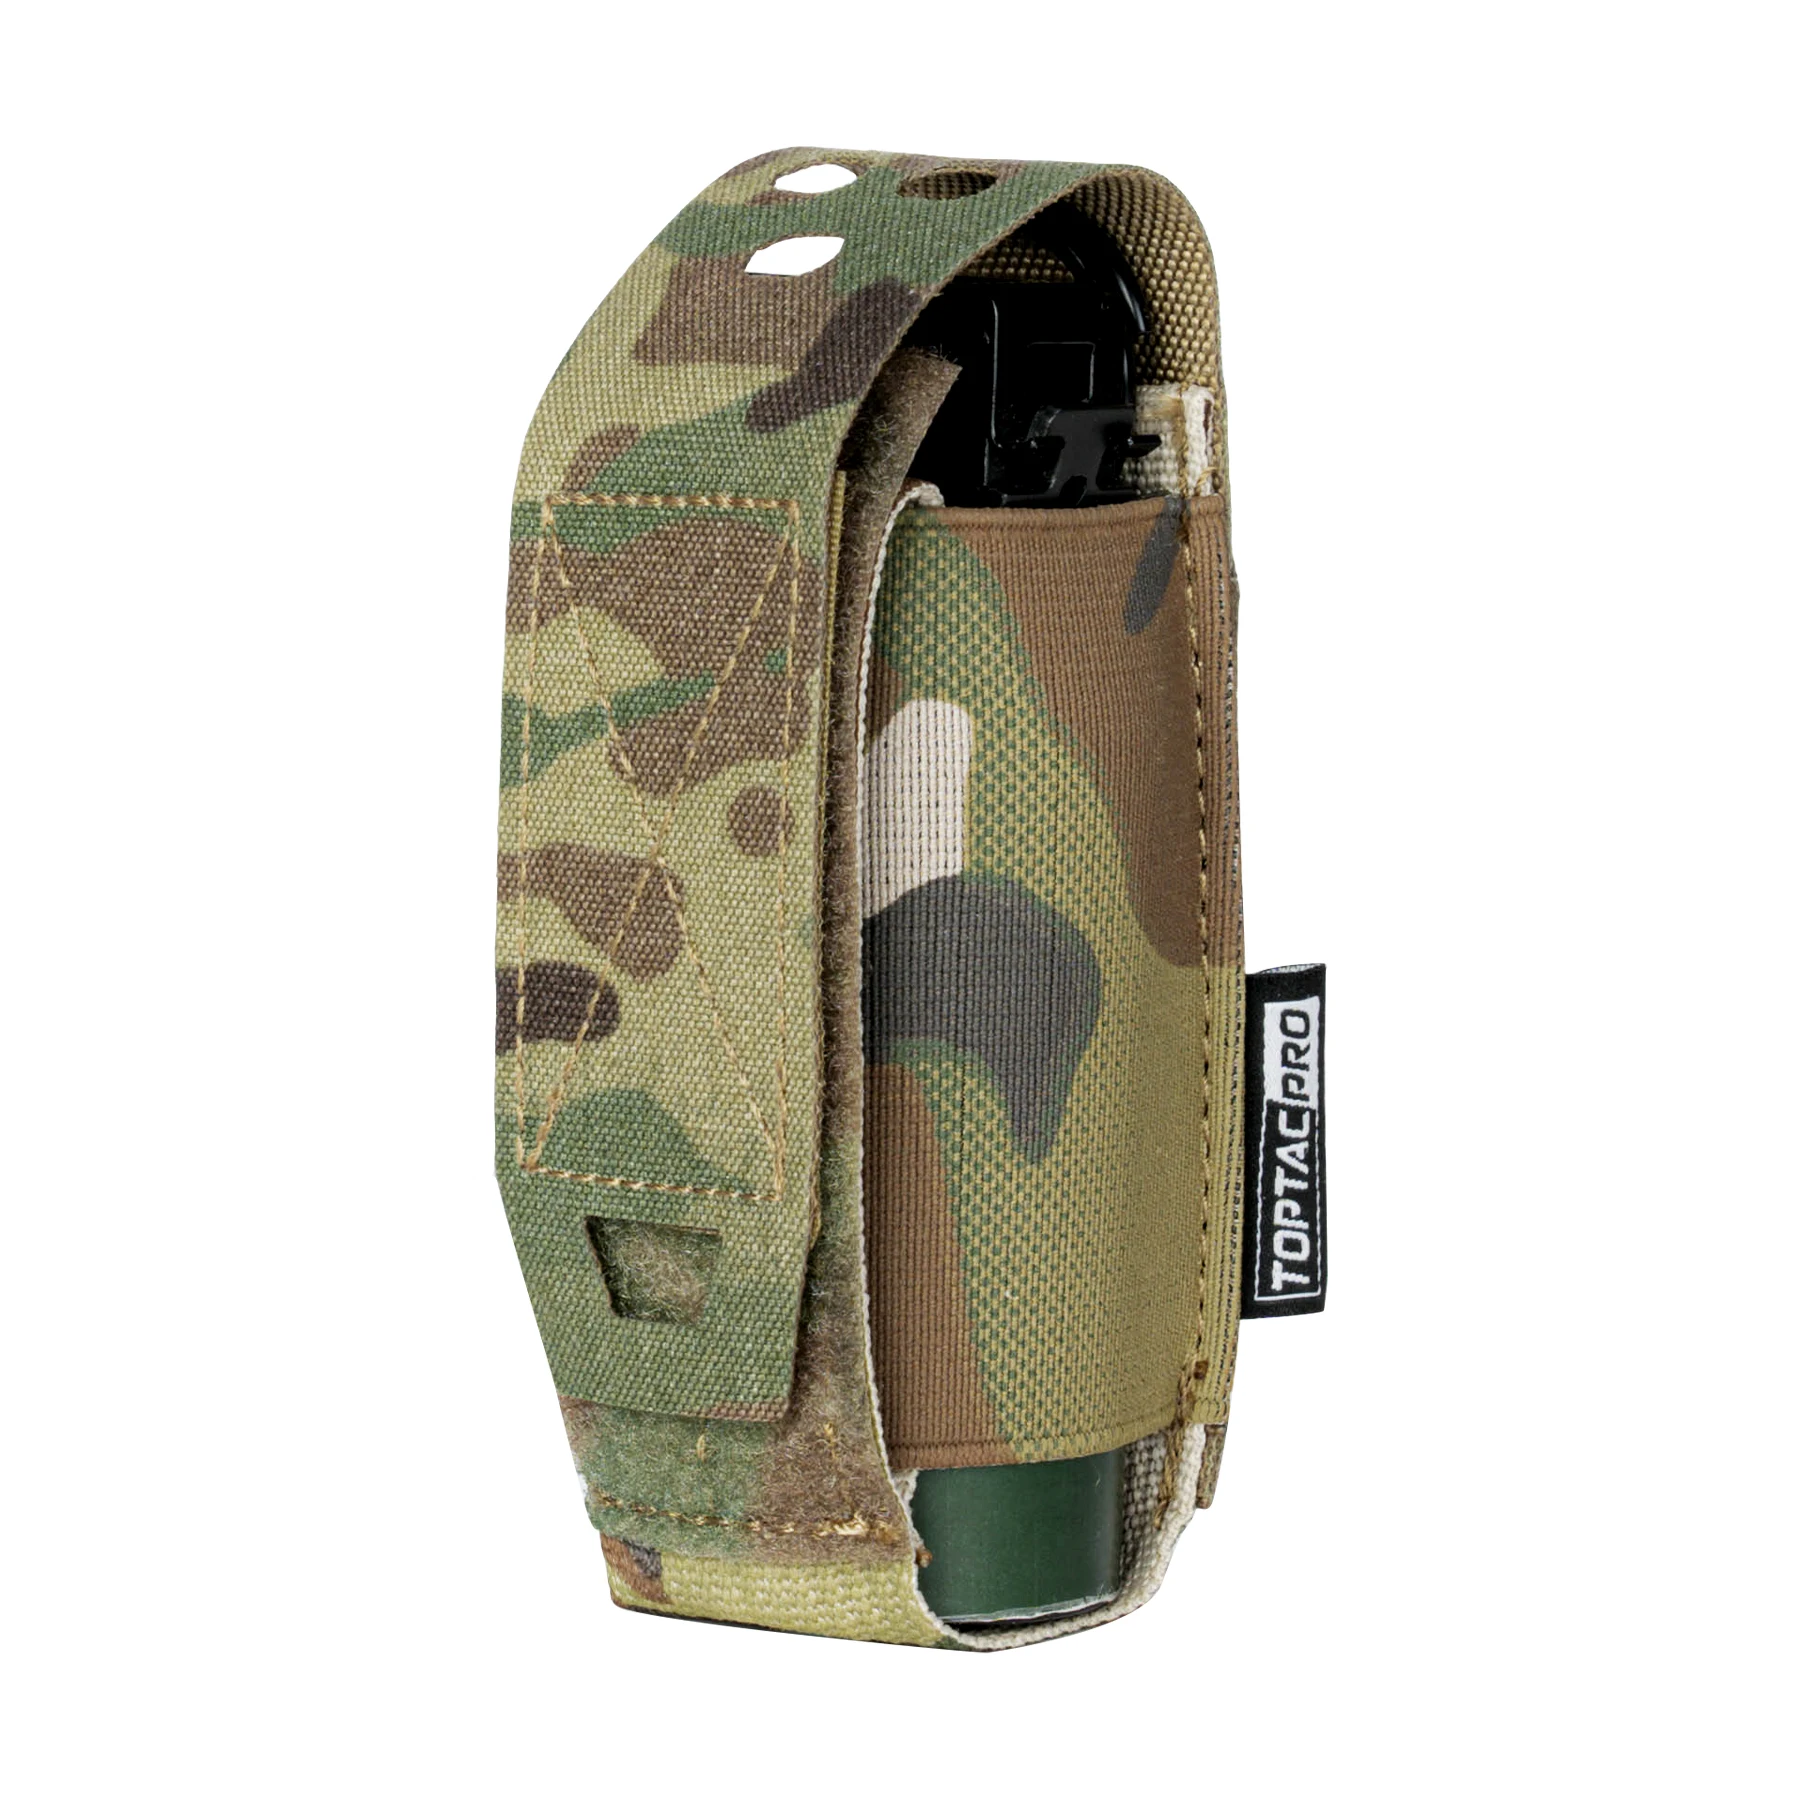 

TOPTACPRO 500D Cordura Molle Camouflage Magazine Pouch Tactical Pouches Flash Bang Pouch Tactical flashlight Holder